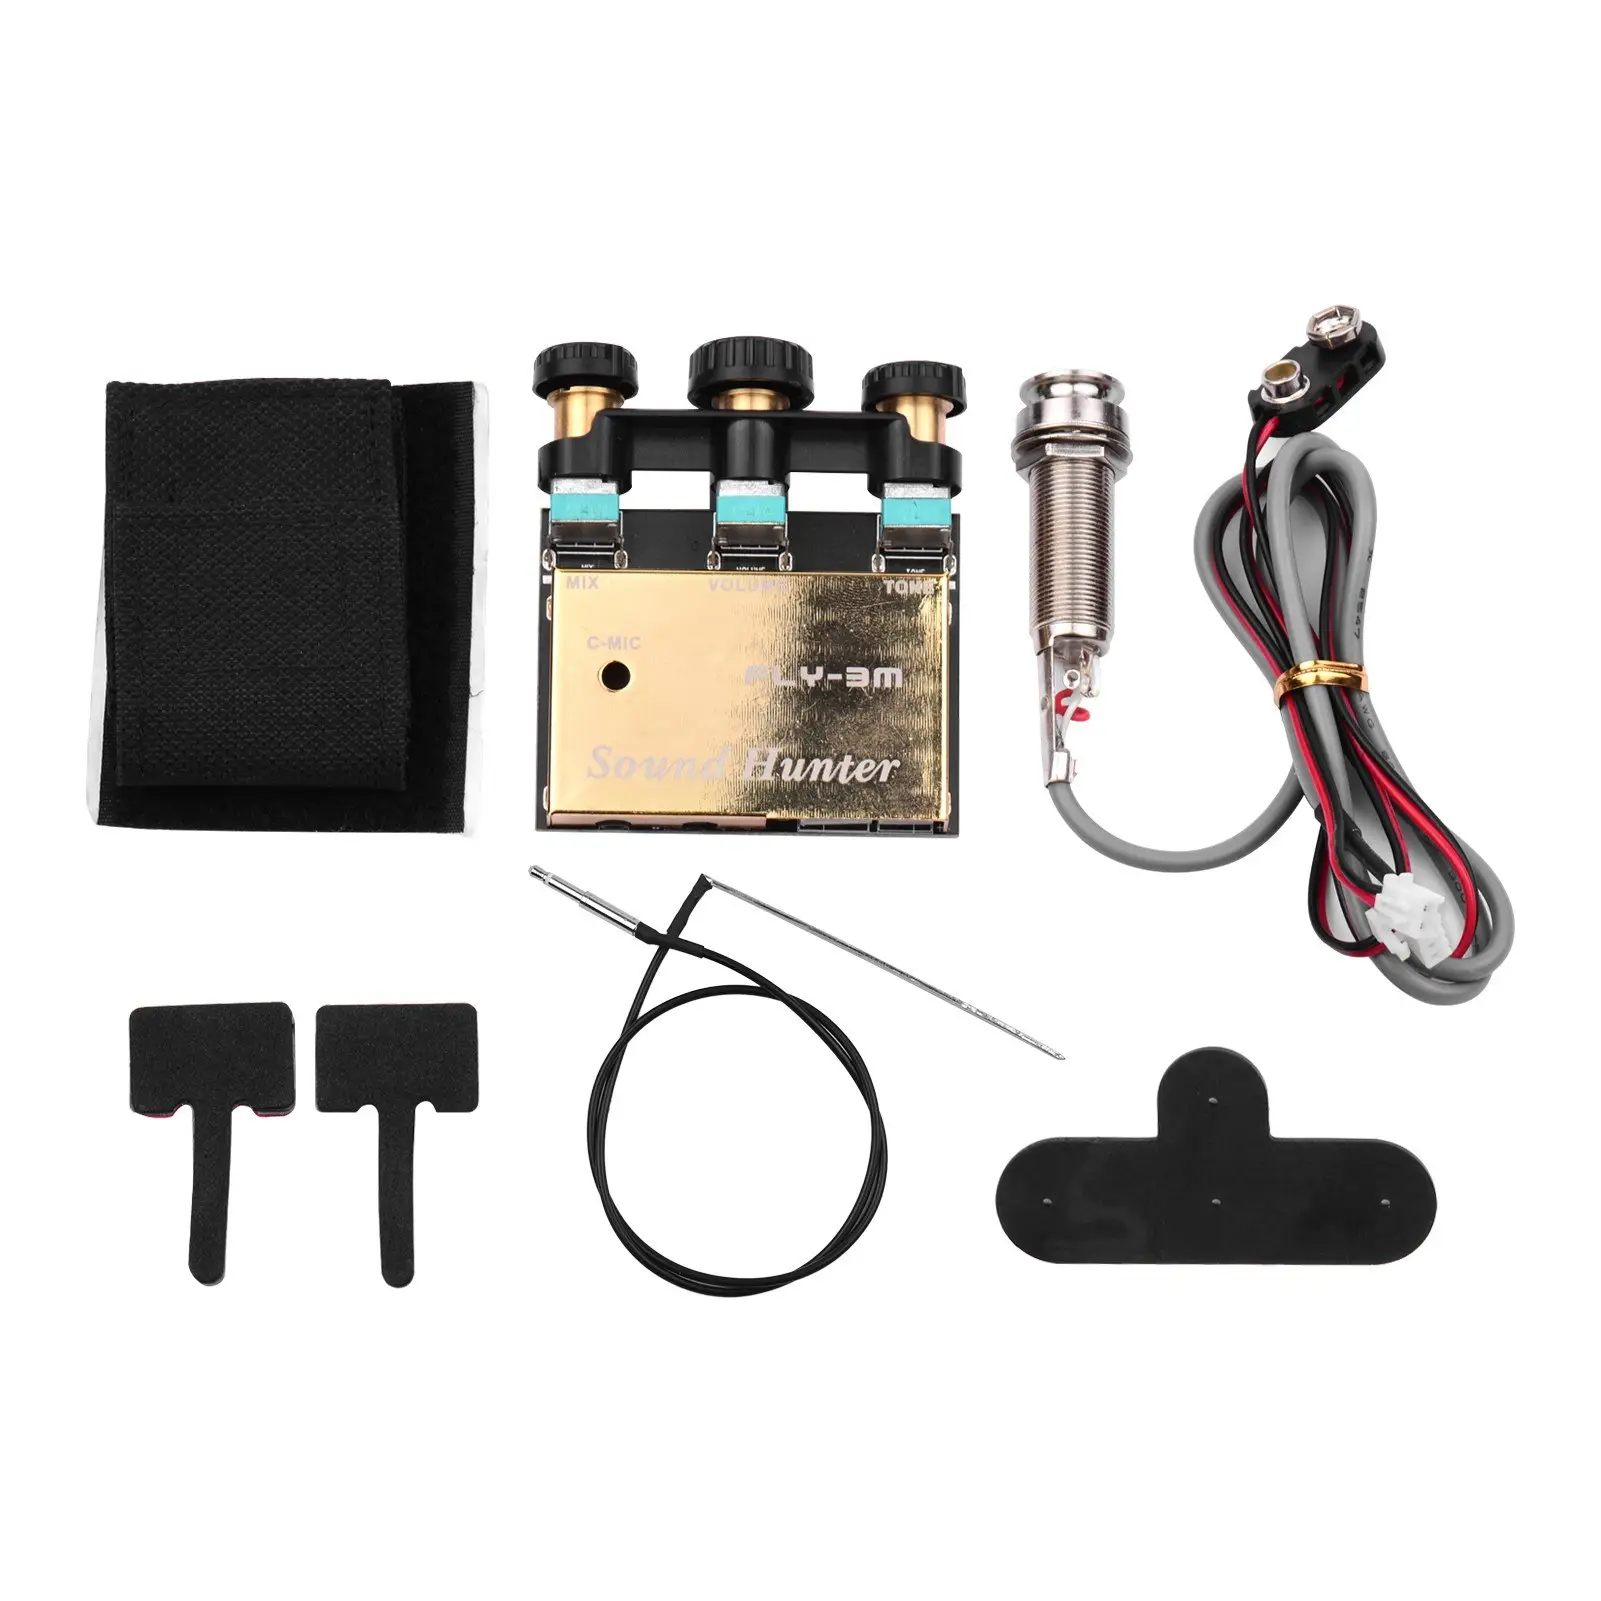 Sound Hunter Guitar Pickup Acoustic Guitar Onboard Active Piezo Pick Up EQ Equalizer Dual Source Preamp System with Mic Volume &